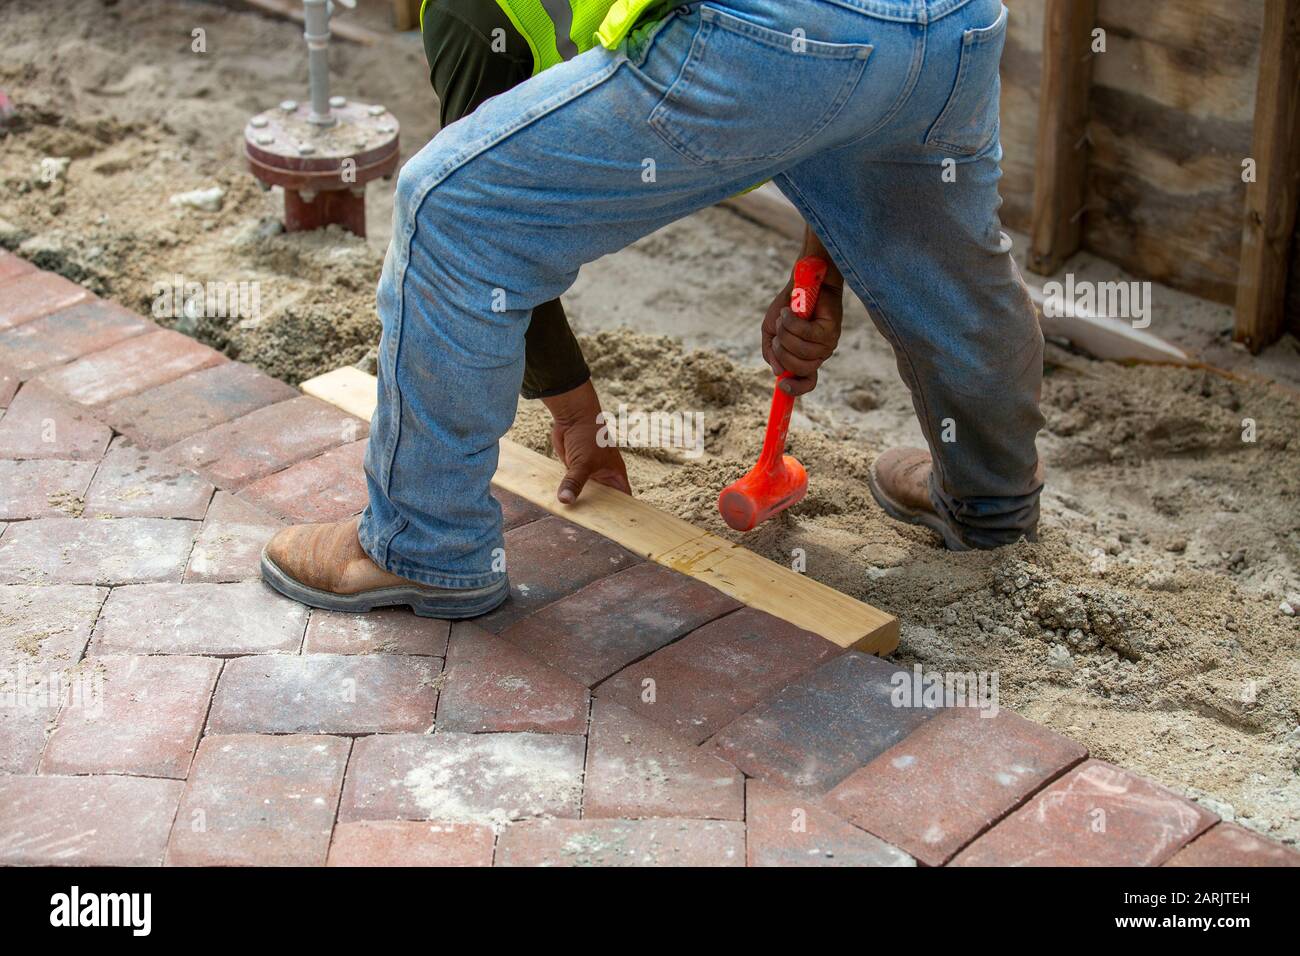 Brick layer tamping or tapping his orange mallet or hammer against a 2x4 to adjust the freshly laid pavers on the walkway. Stock Photo